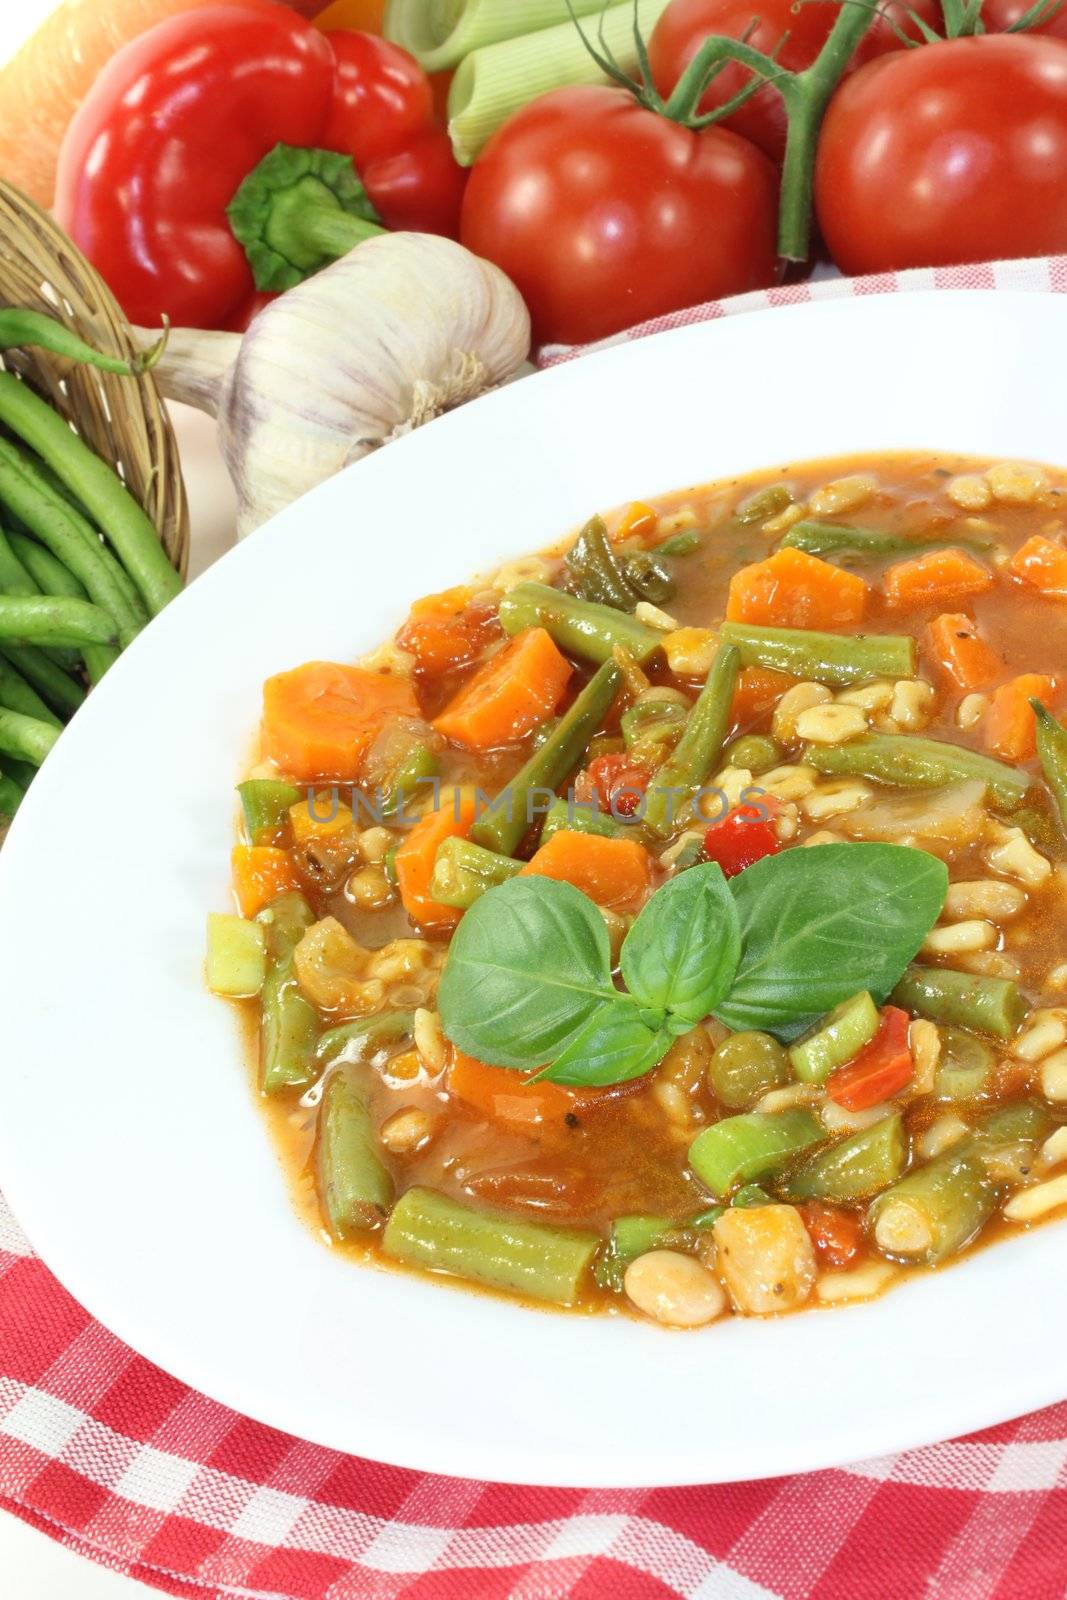 Minestrone with beans, carrots, potatoes, leeks and garlic on a light background